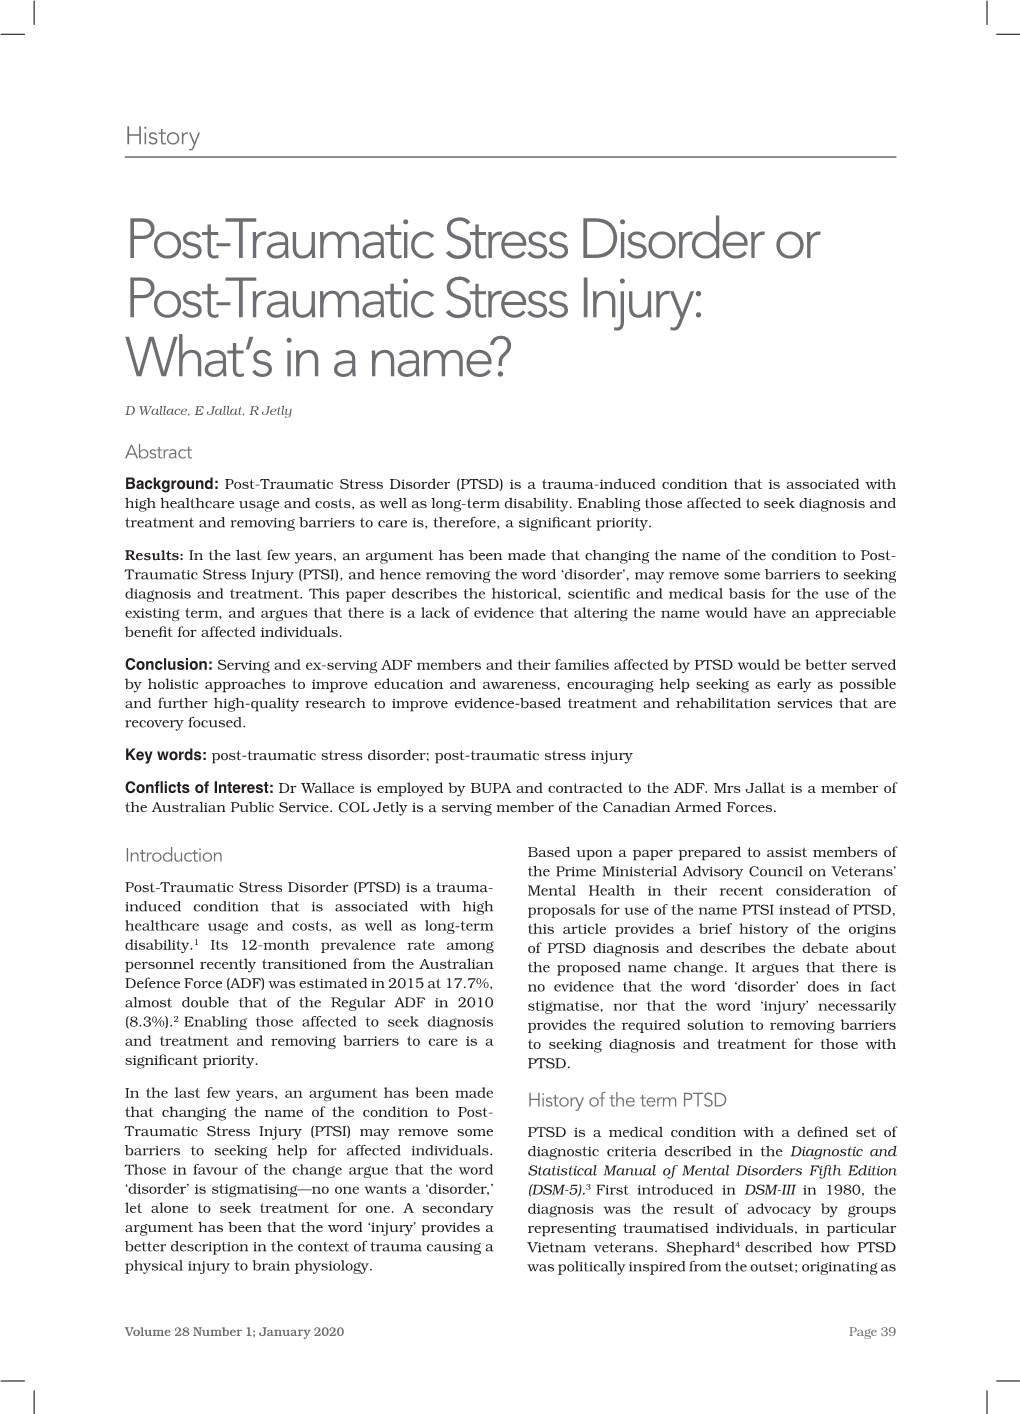 Post-Traumatic Stress Disorder Or Post-Traumatic Stress Injury: What’S in a Name?